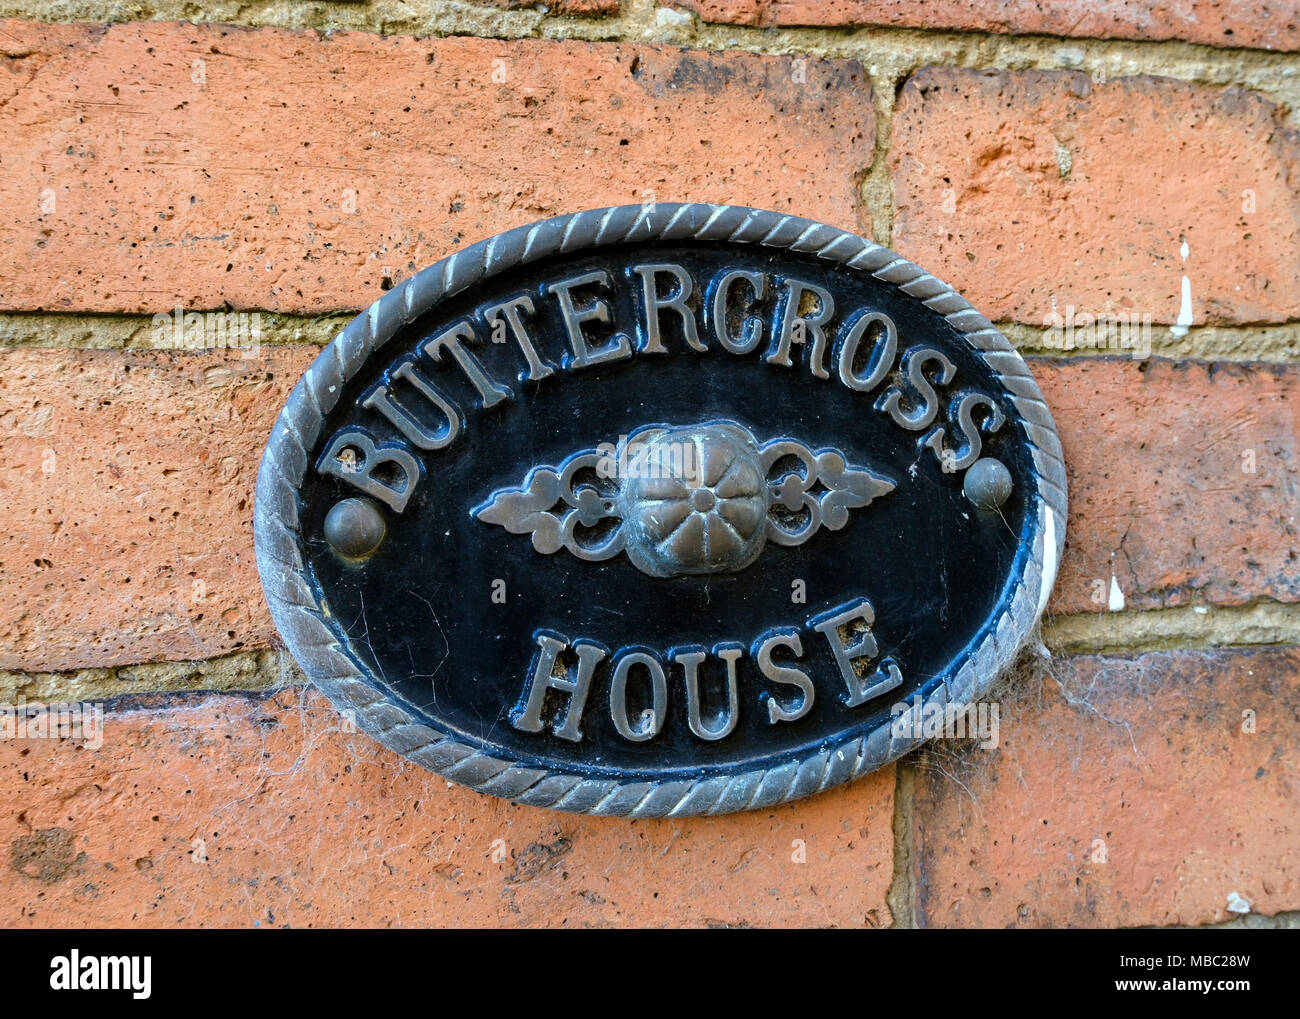 Smart ornate oval cast metal house sign for Buttercross House mounted on old red brick wall, Oakham, Rutland, Leicestershire, England, UK Stock Photo